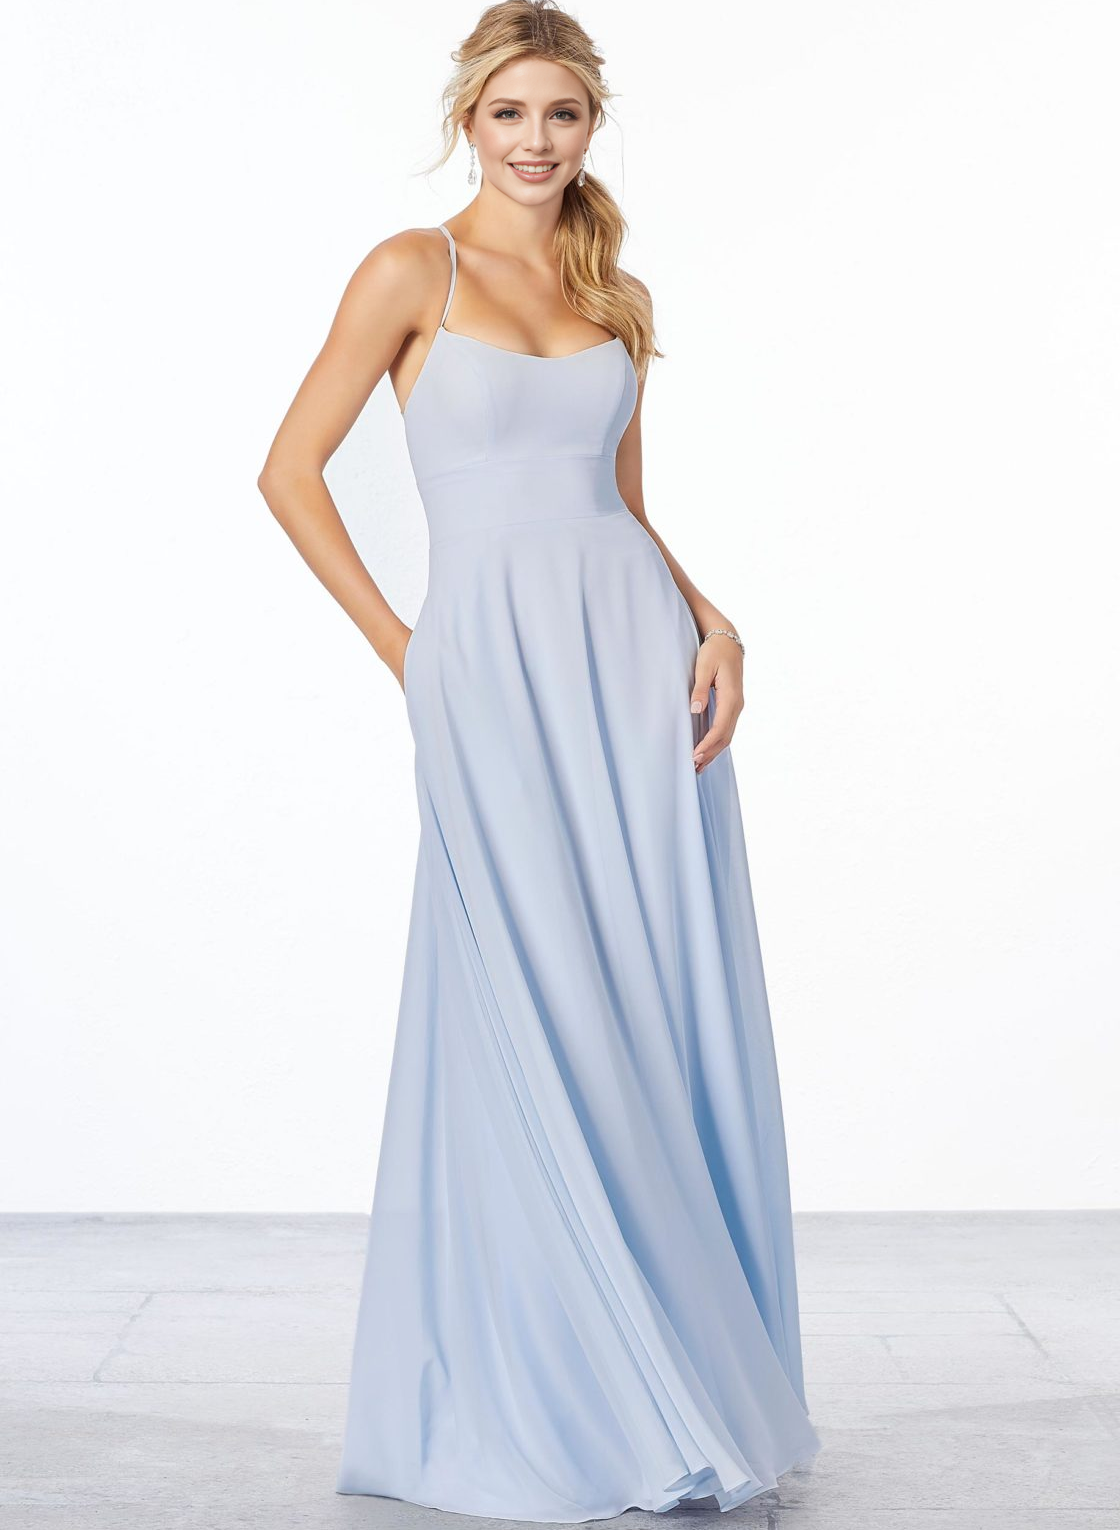 Modern Simple A-Line Bridesmaid Dresses With Pockets